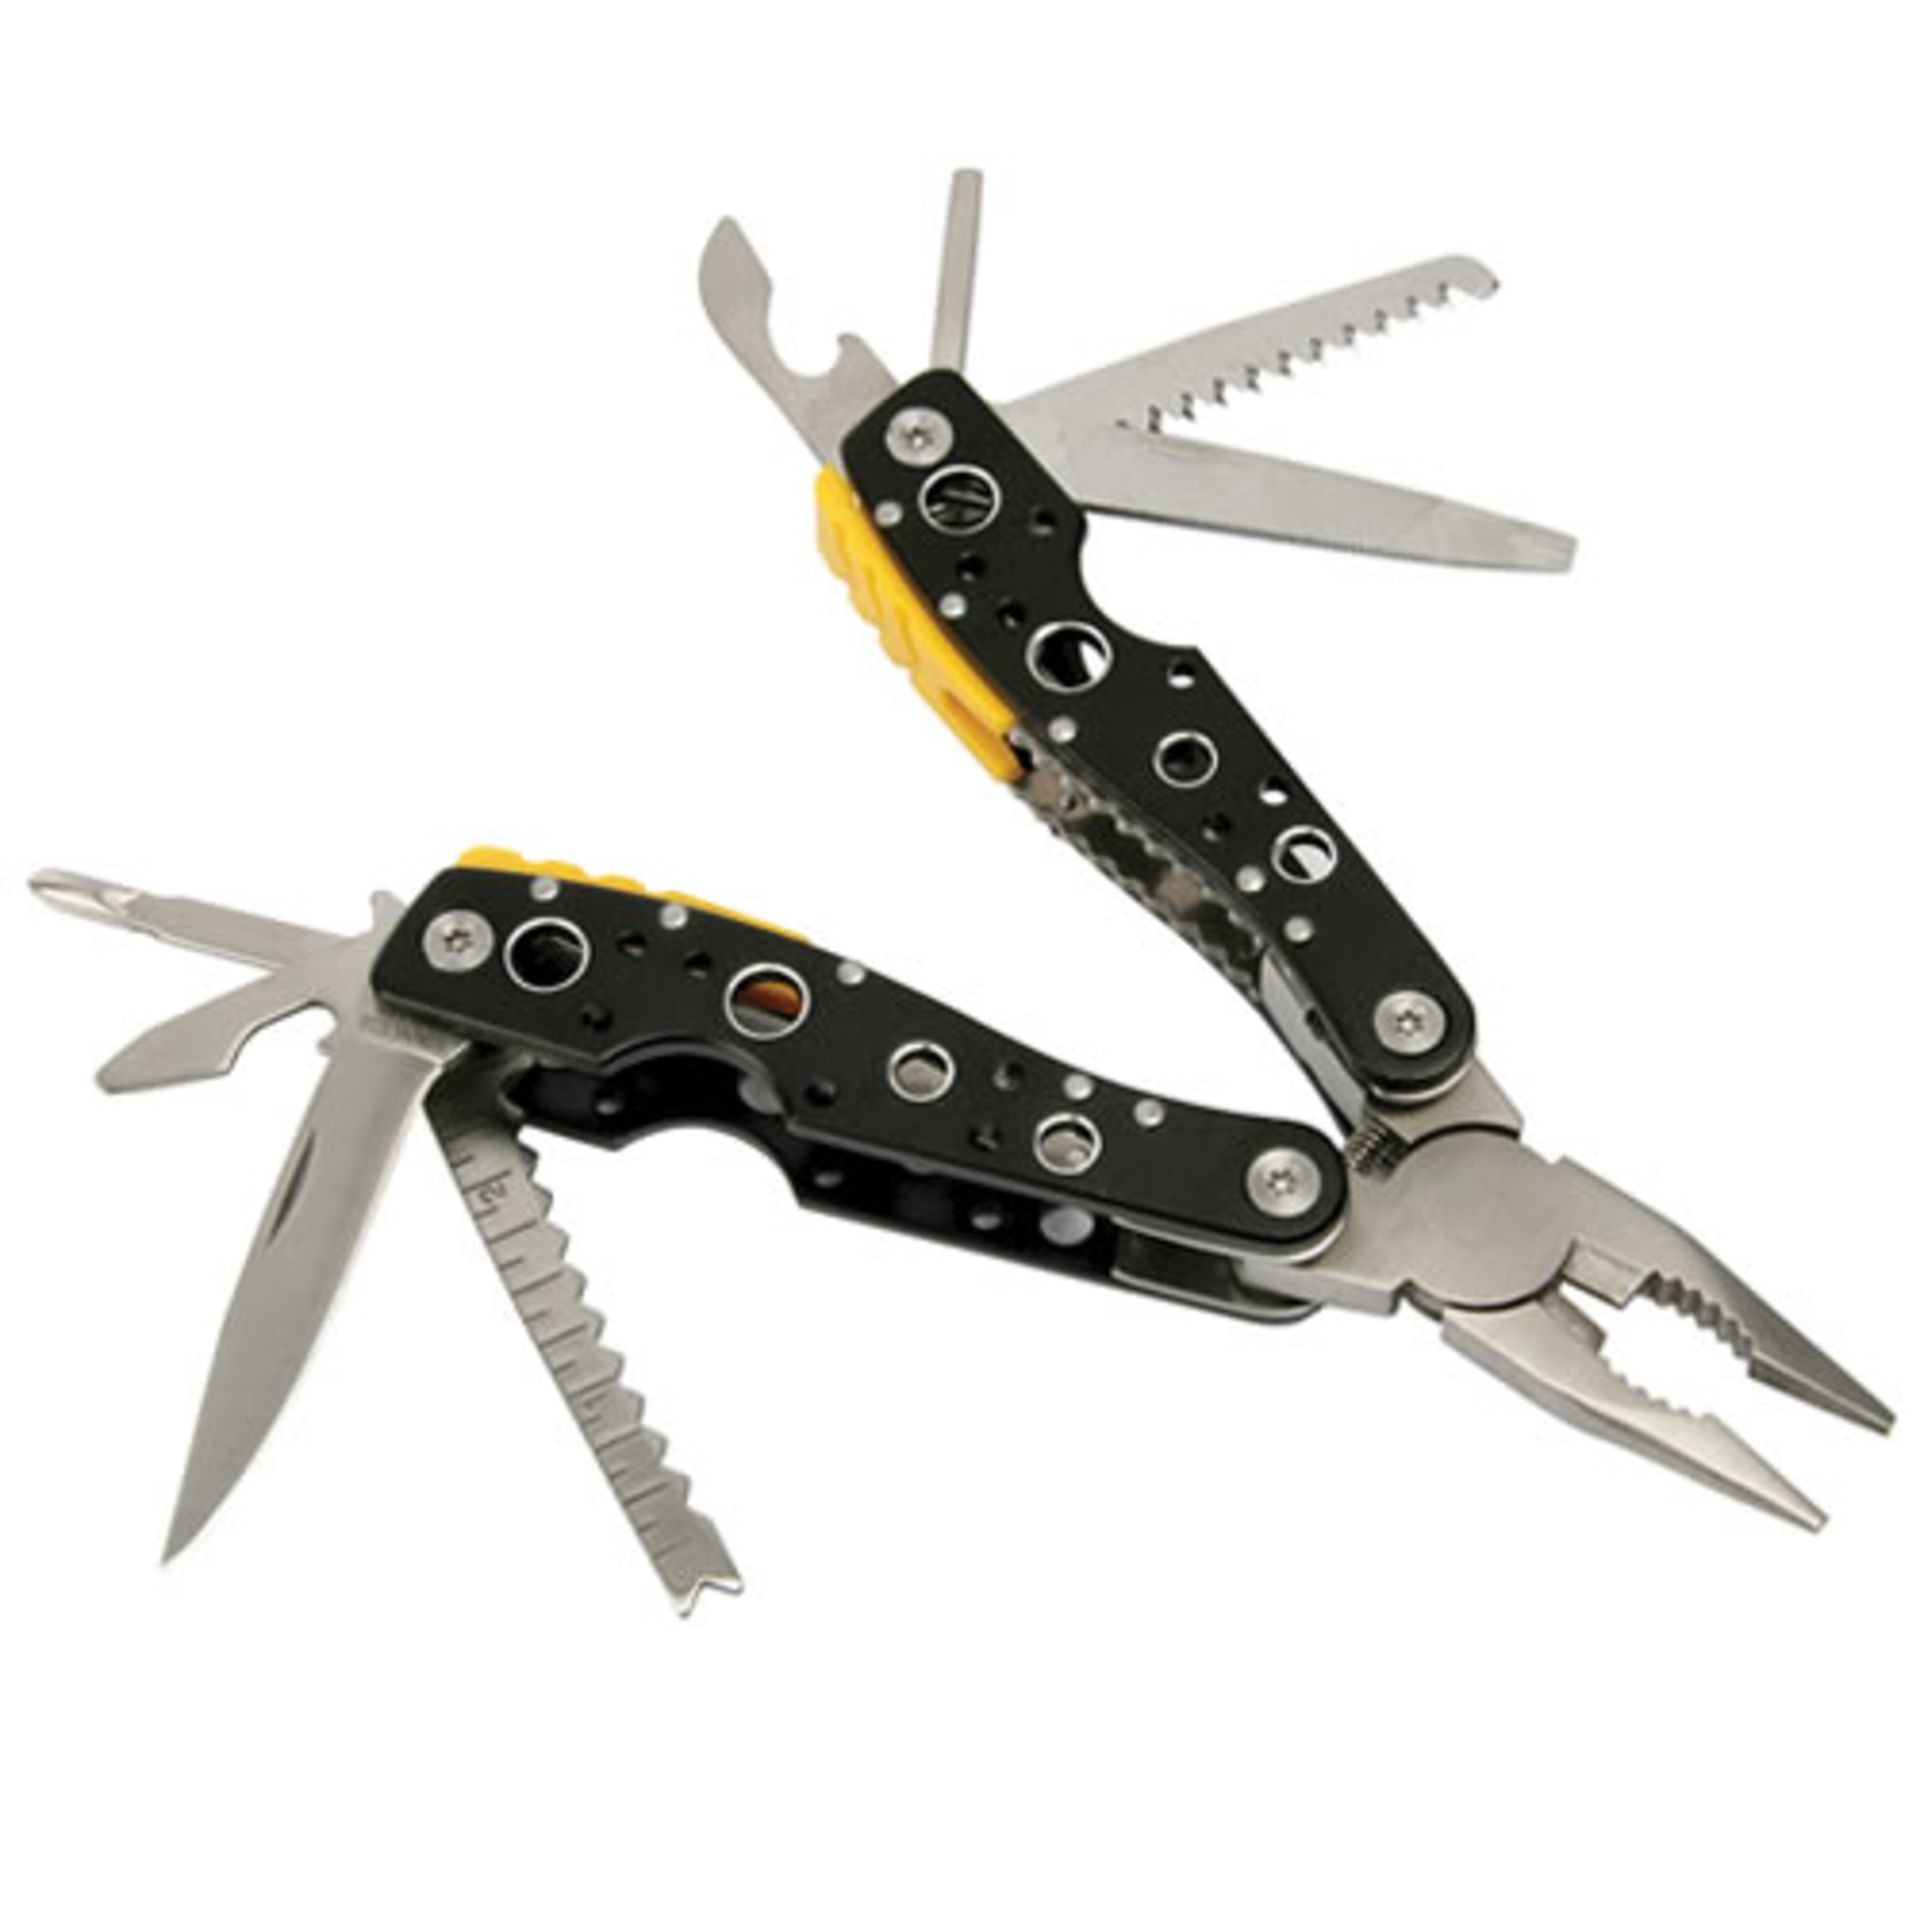 V  Grade A 14 In 1 Multitool In Gift Box With Carry Pouch Aluminium Handles With Saw/Knife/Hook/